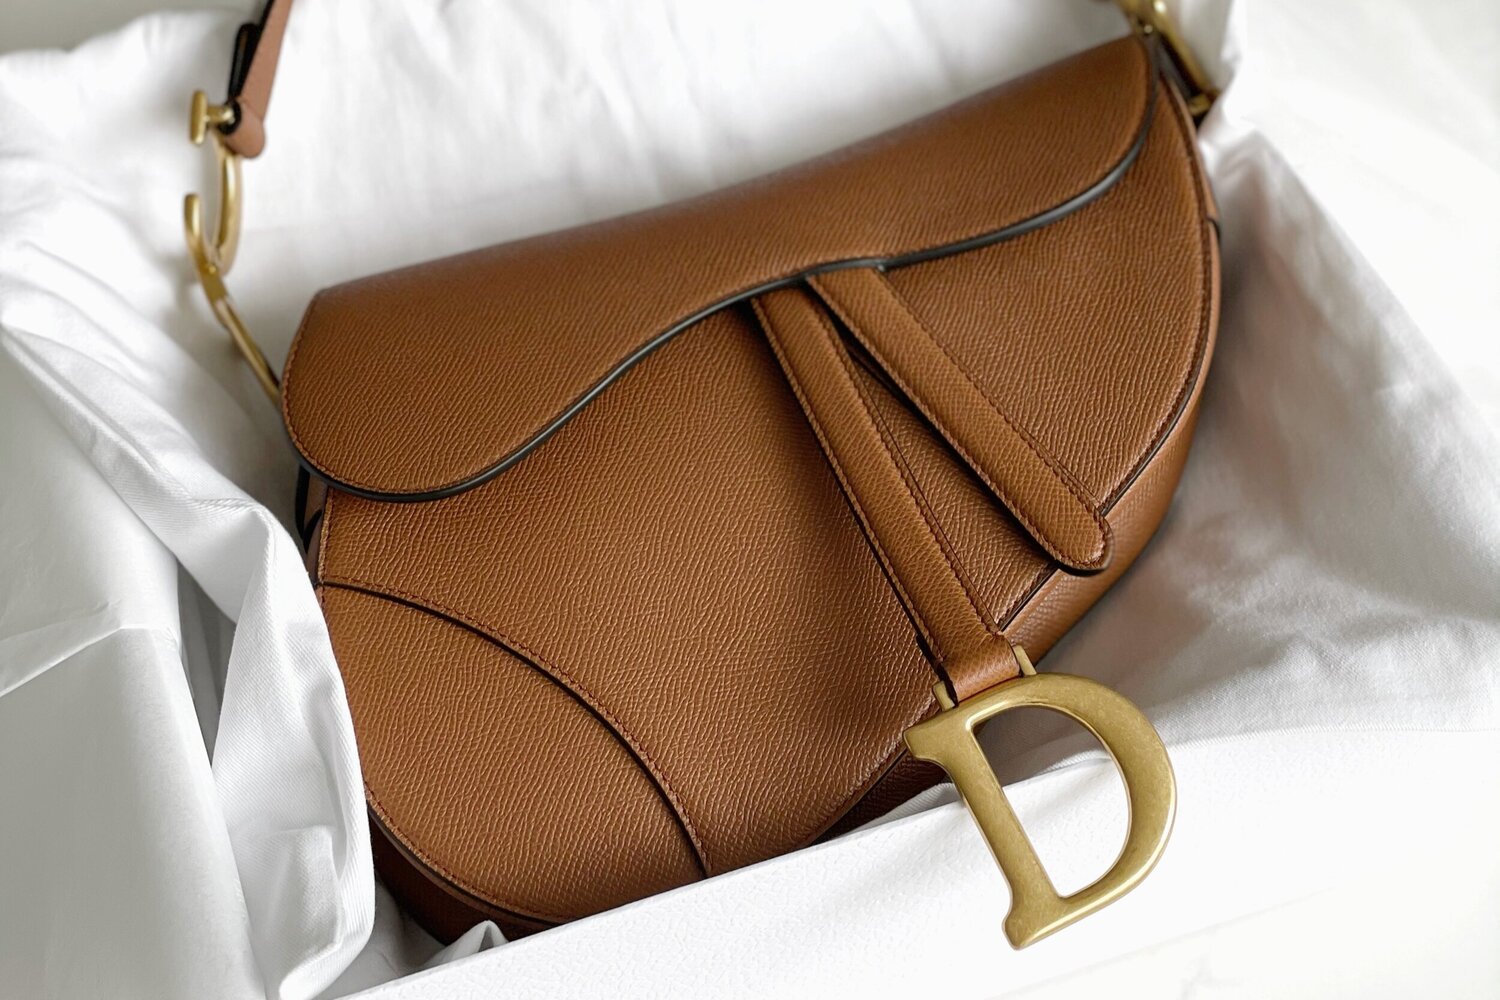 Christian Dior Saddle Bag Review + Outfit Styling